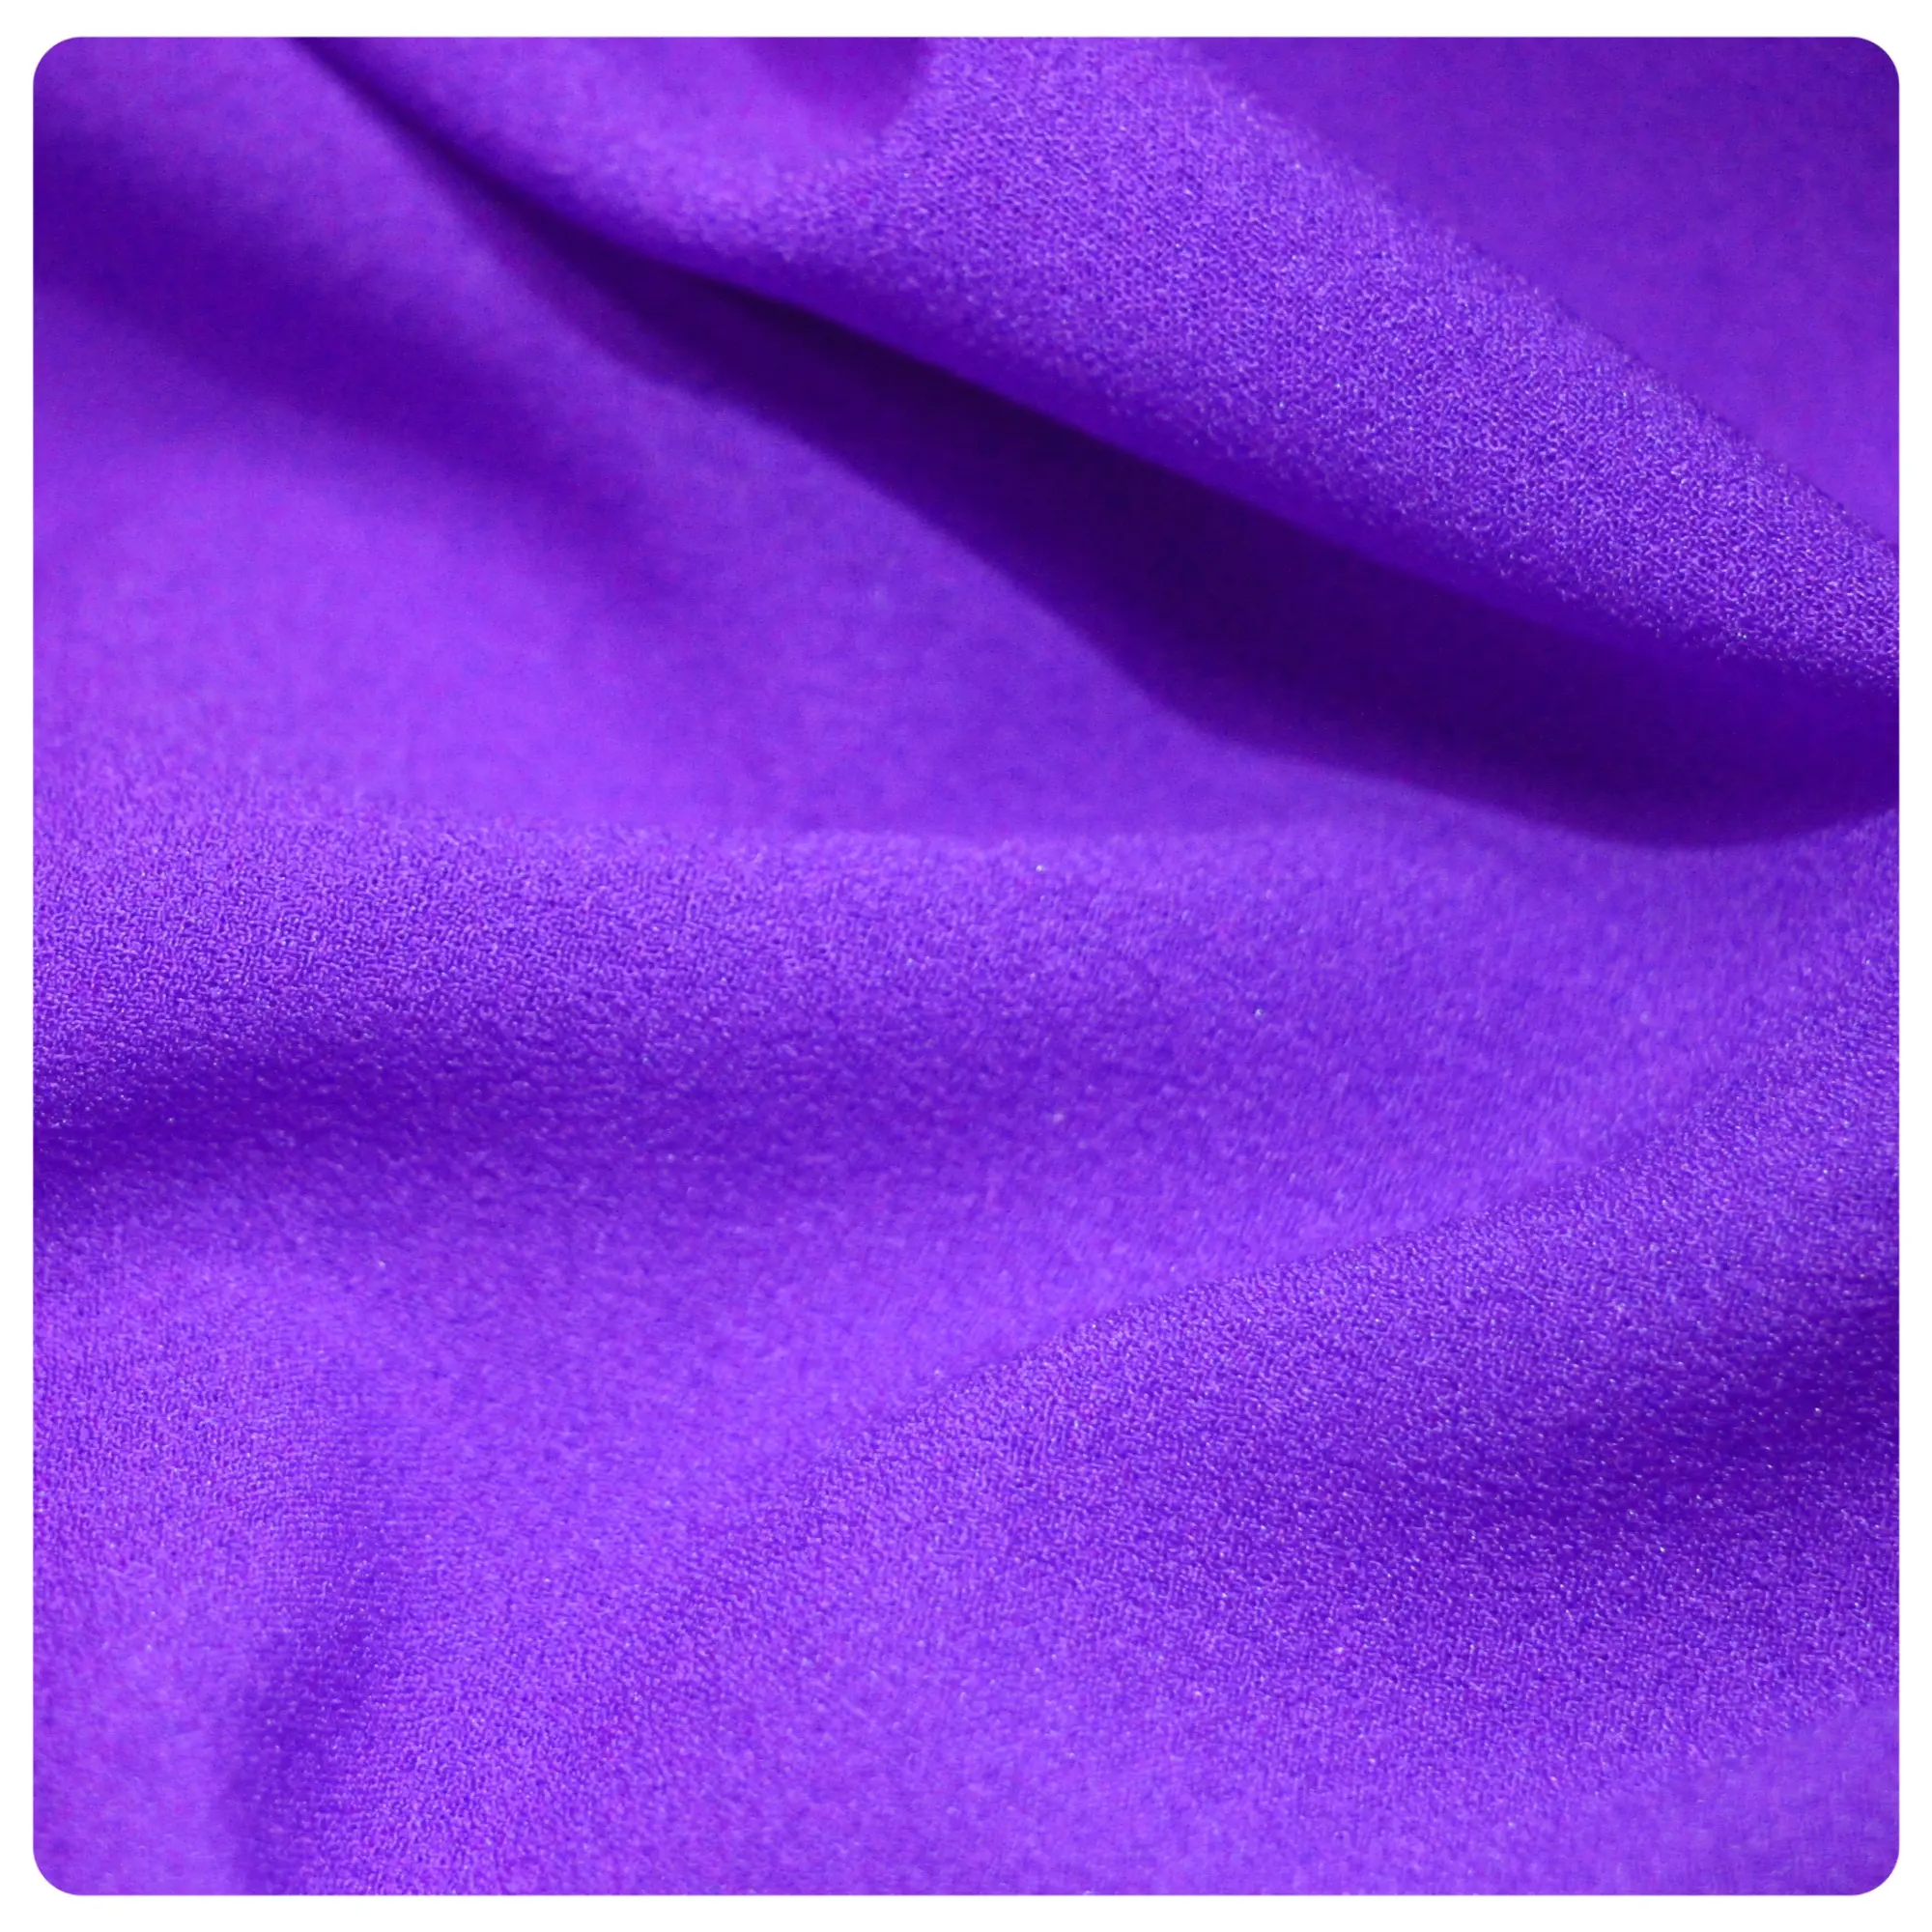 120-130gsm high stretchable 100% polyester fabric crepe come moss crepe fabrics for clothing